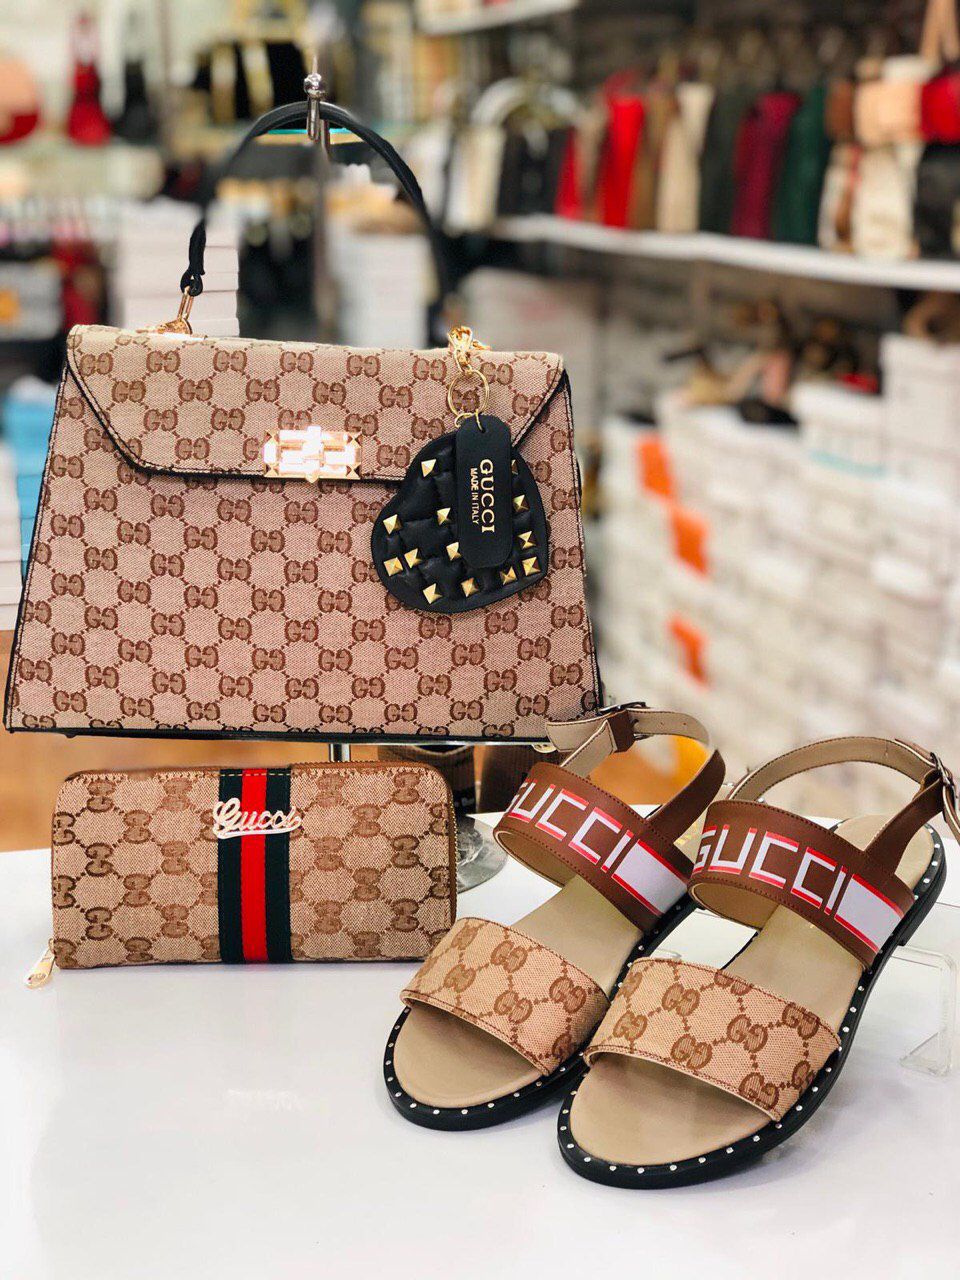 Gucci set for Sale in Houston, TX - OfferUp